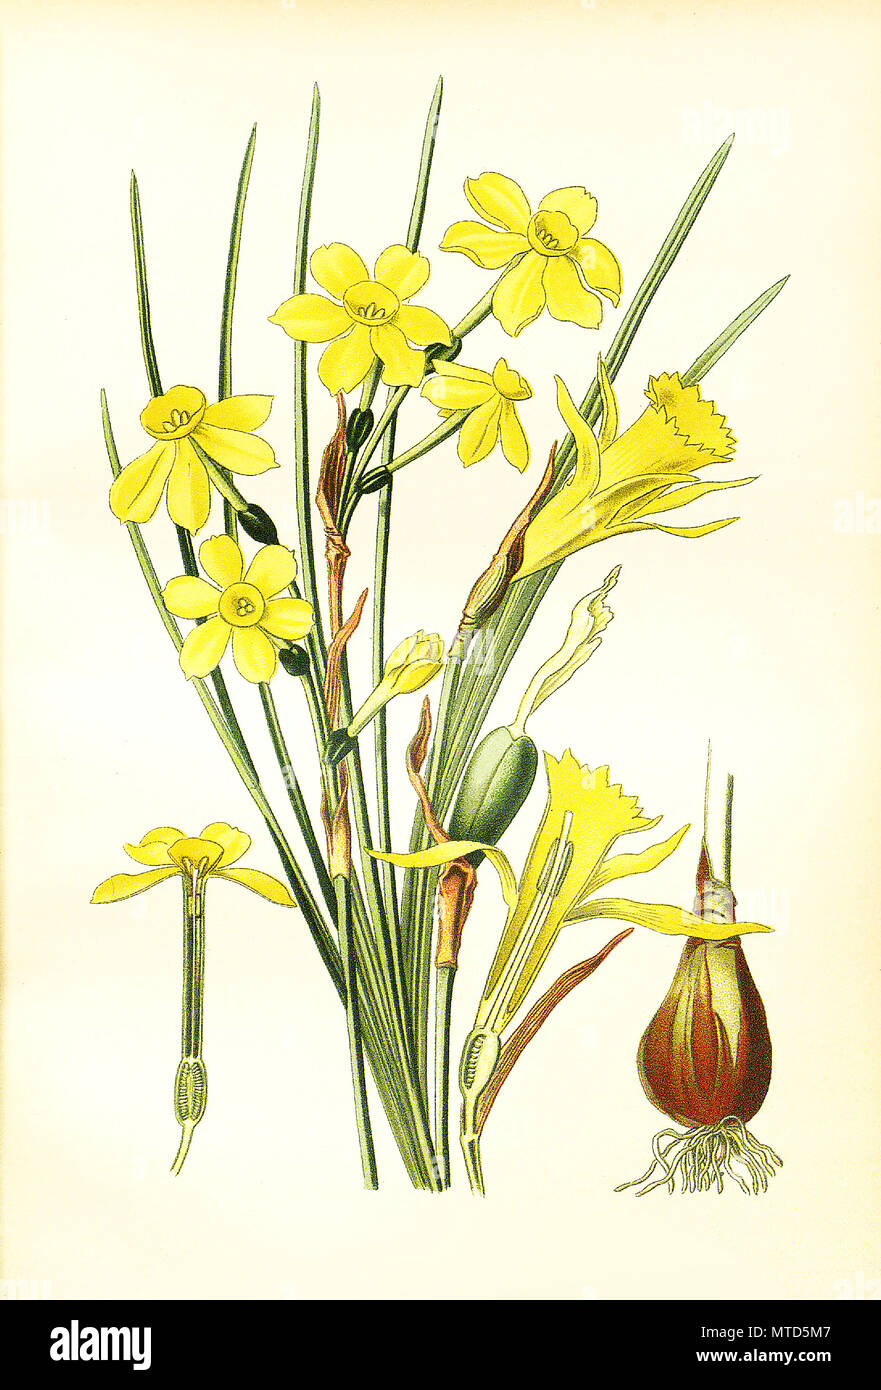 Narcissus jonquilla, Jonoquil, Narcissus Pseudo Narcissus, Daffodil,  rush daffodil. Jonquille, Narzisse, digital improved reproduction from a print of the 19th century Stock Photo